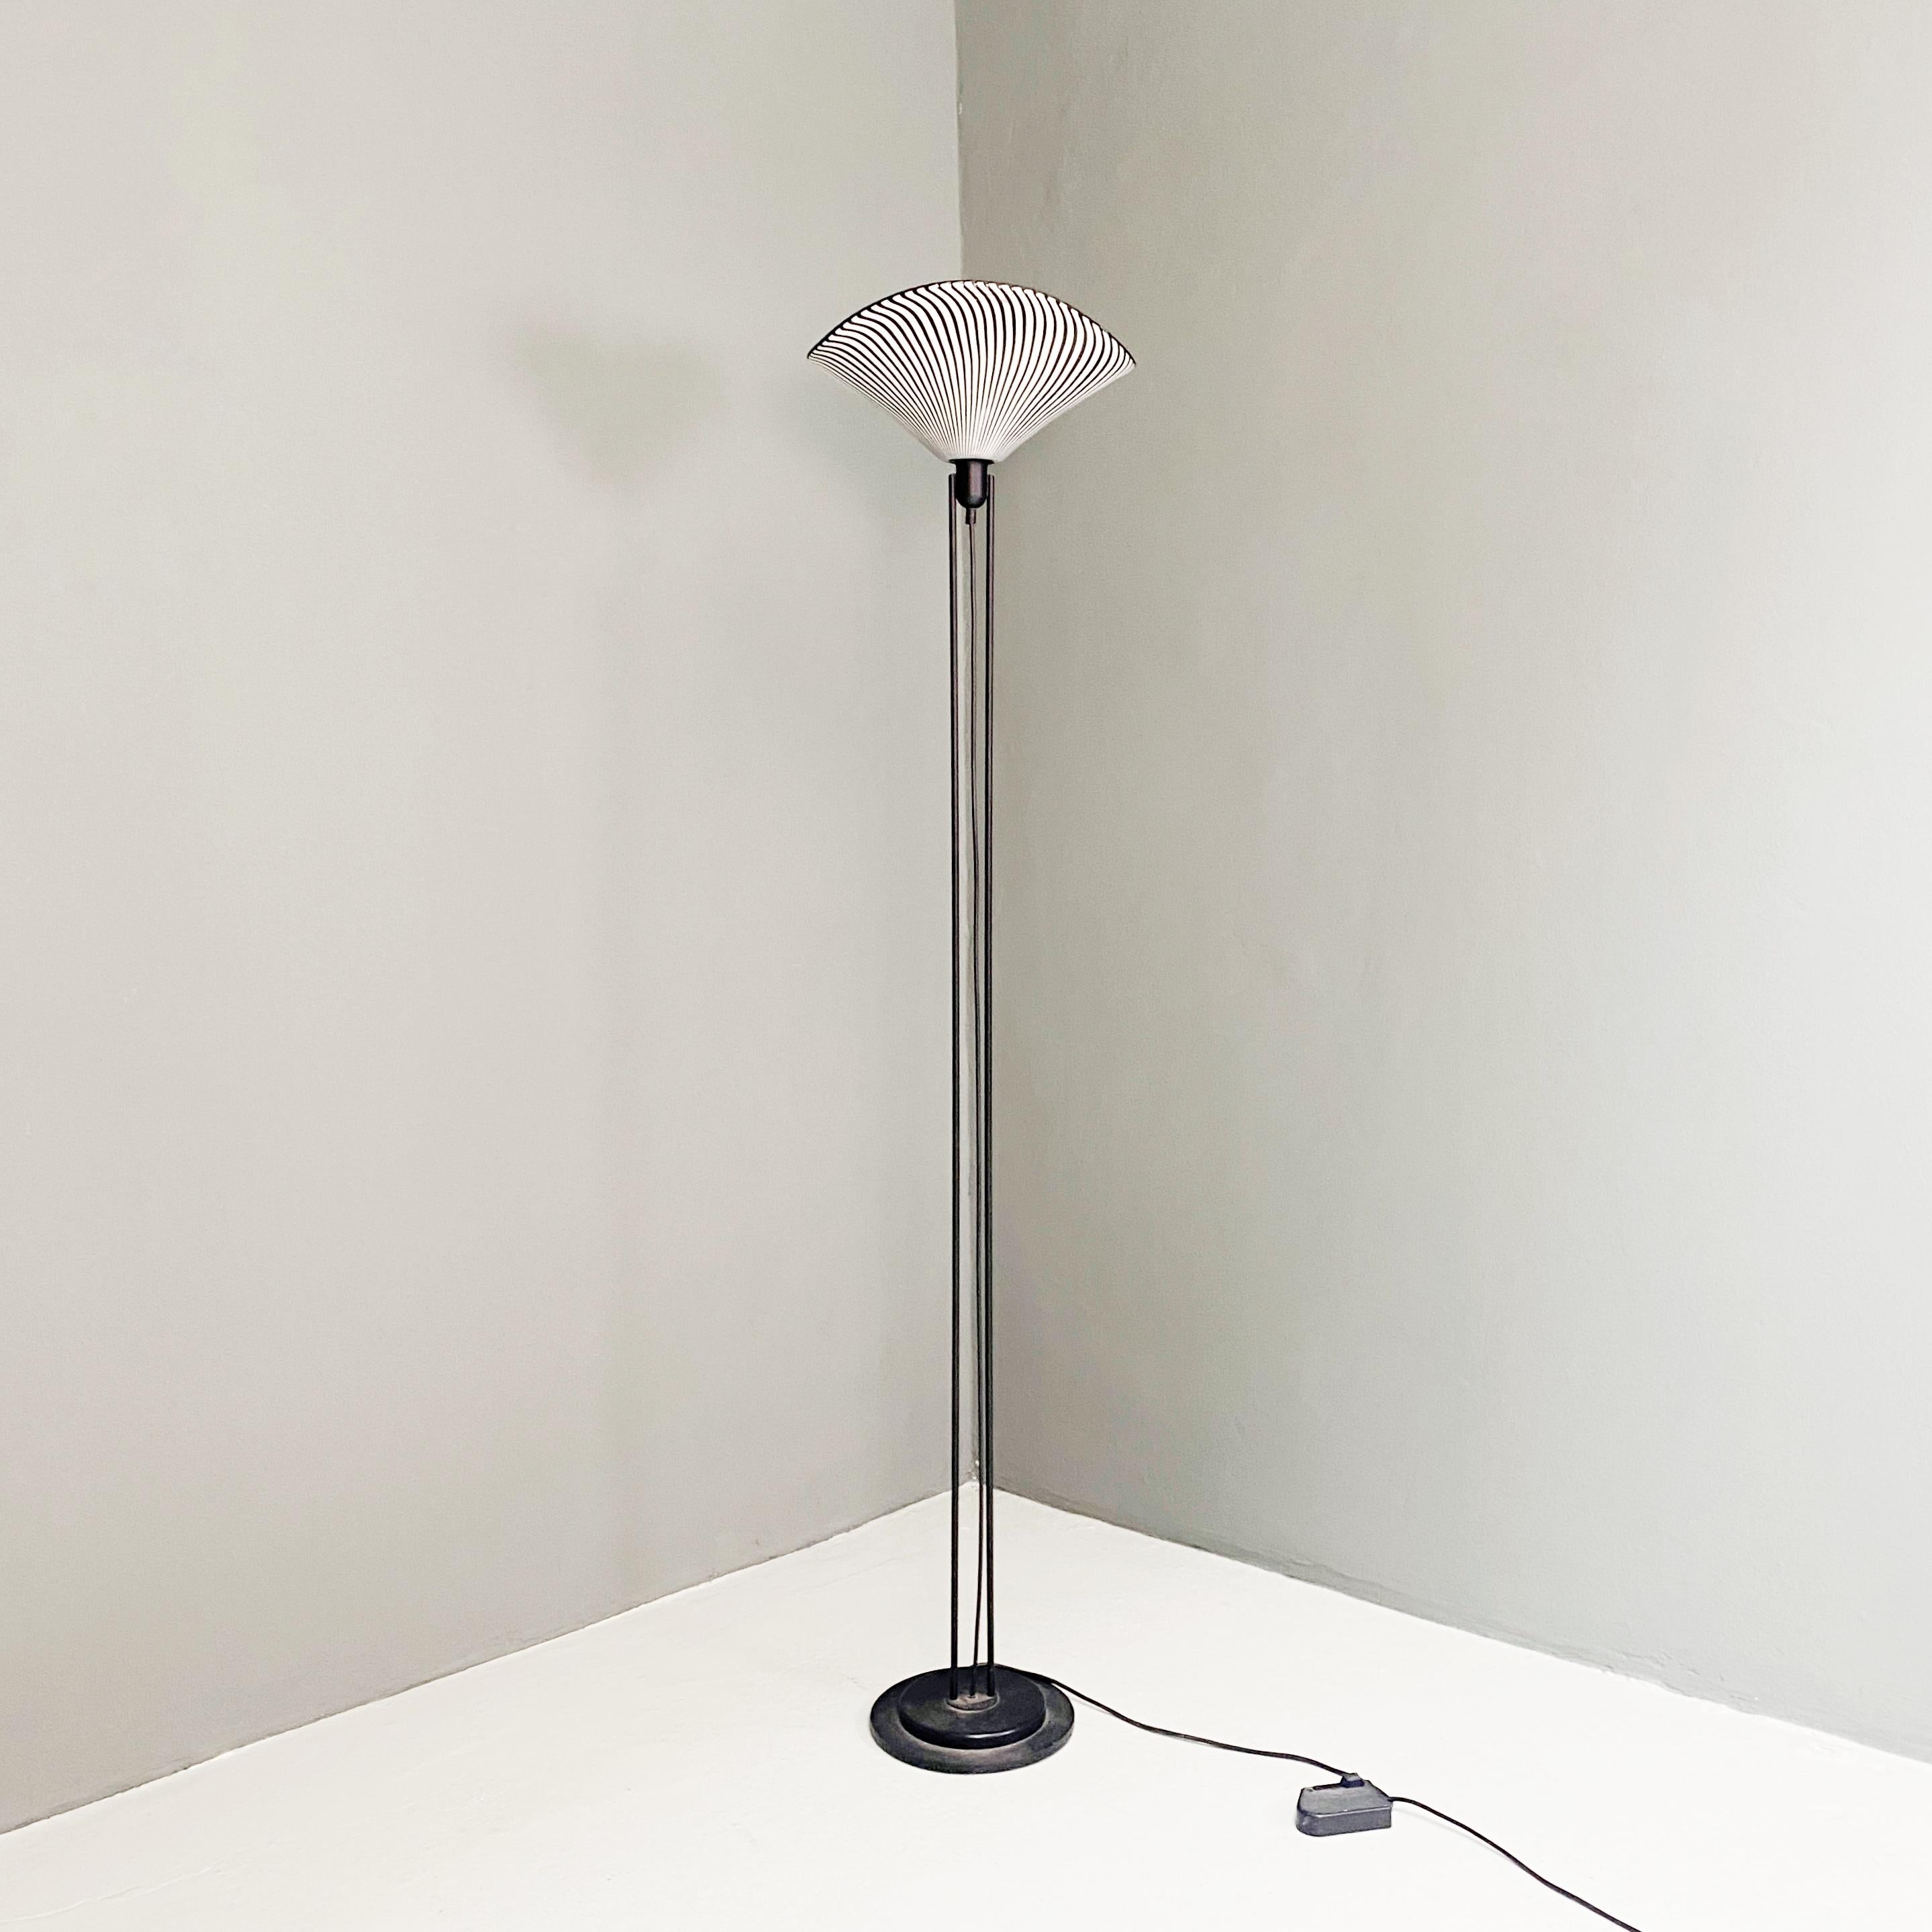 Murano glass floor lamp by Lino Tagliapietra for Effetre Murano, 1960s
Floor lamp with base in matt black enamelled metal and Murano glass lampshade with black spiral decoration on a white background. Designed by Lino Tagliapietra for Effetre